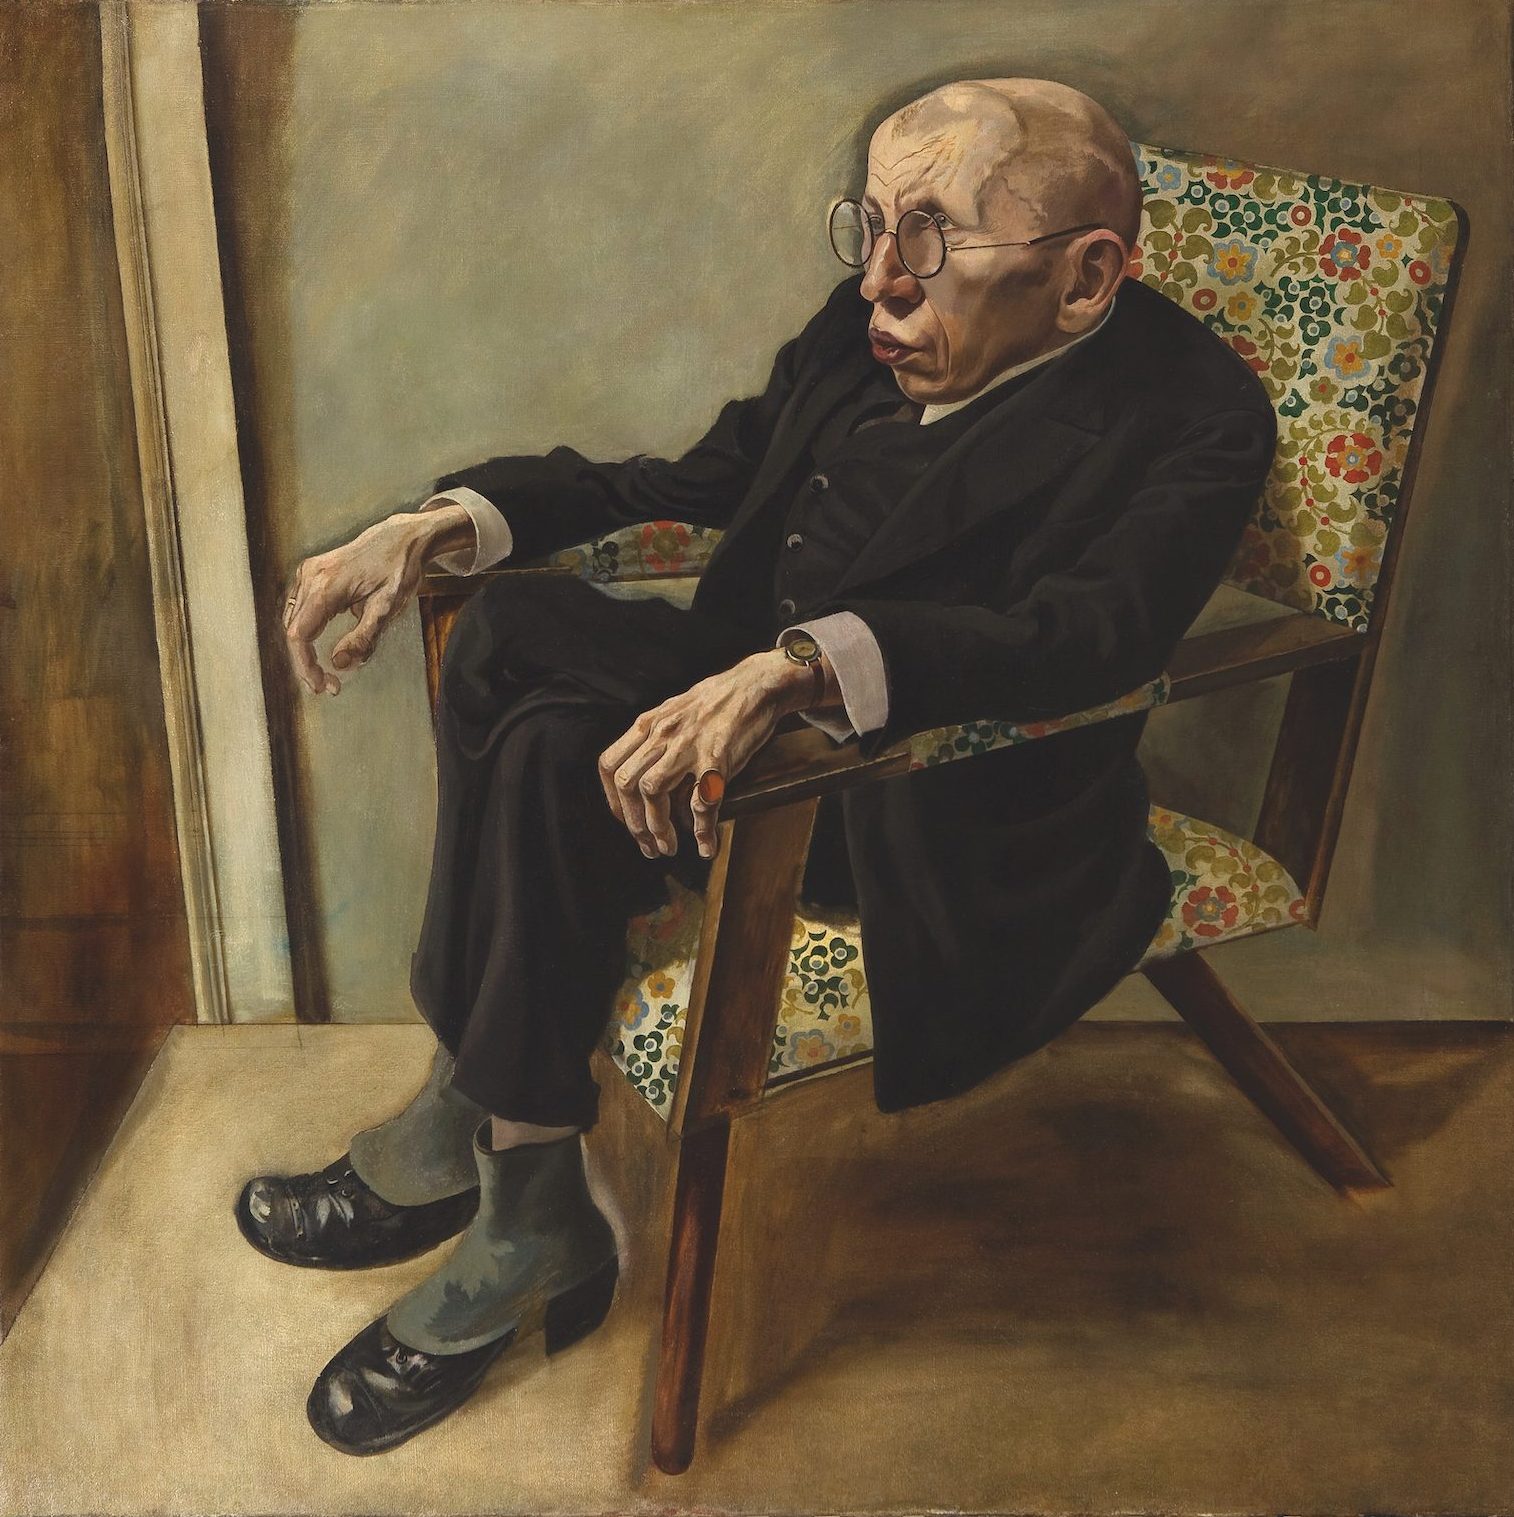 Portrait of an older man sitting in a floral chair